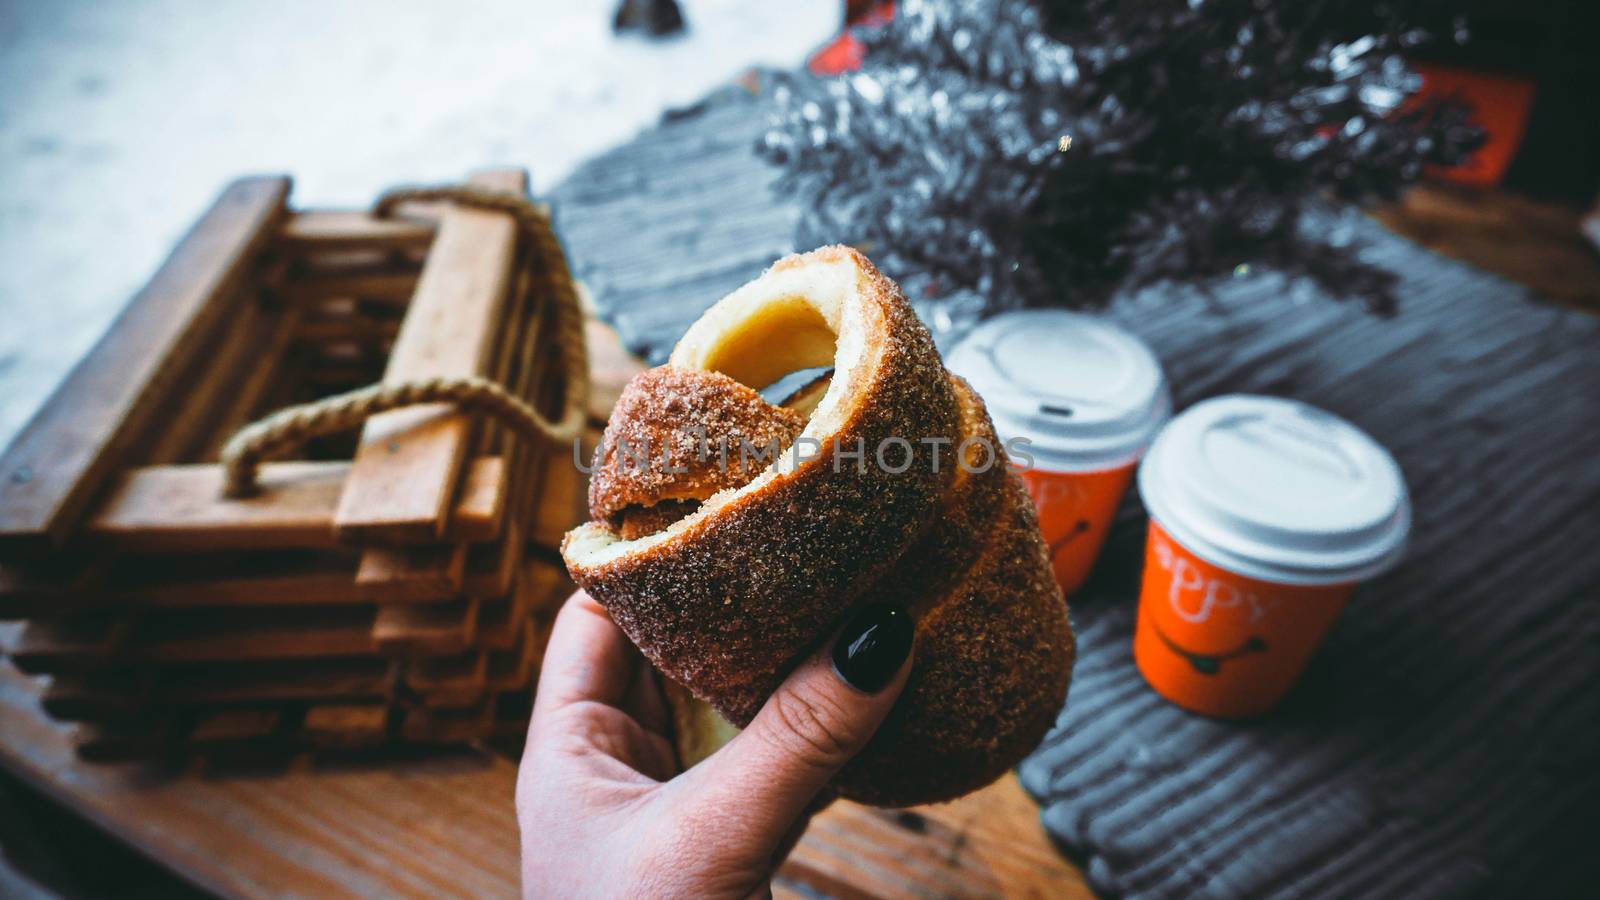 Woman holds in hand Trdlo or Trdelnik, it is a national street street food of Prague on the background of wooden table with glasses of mulled wine